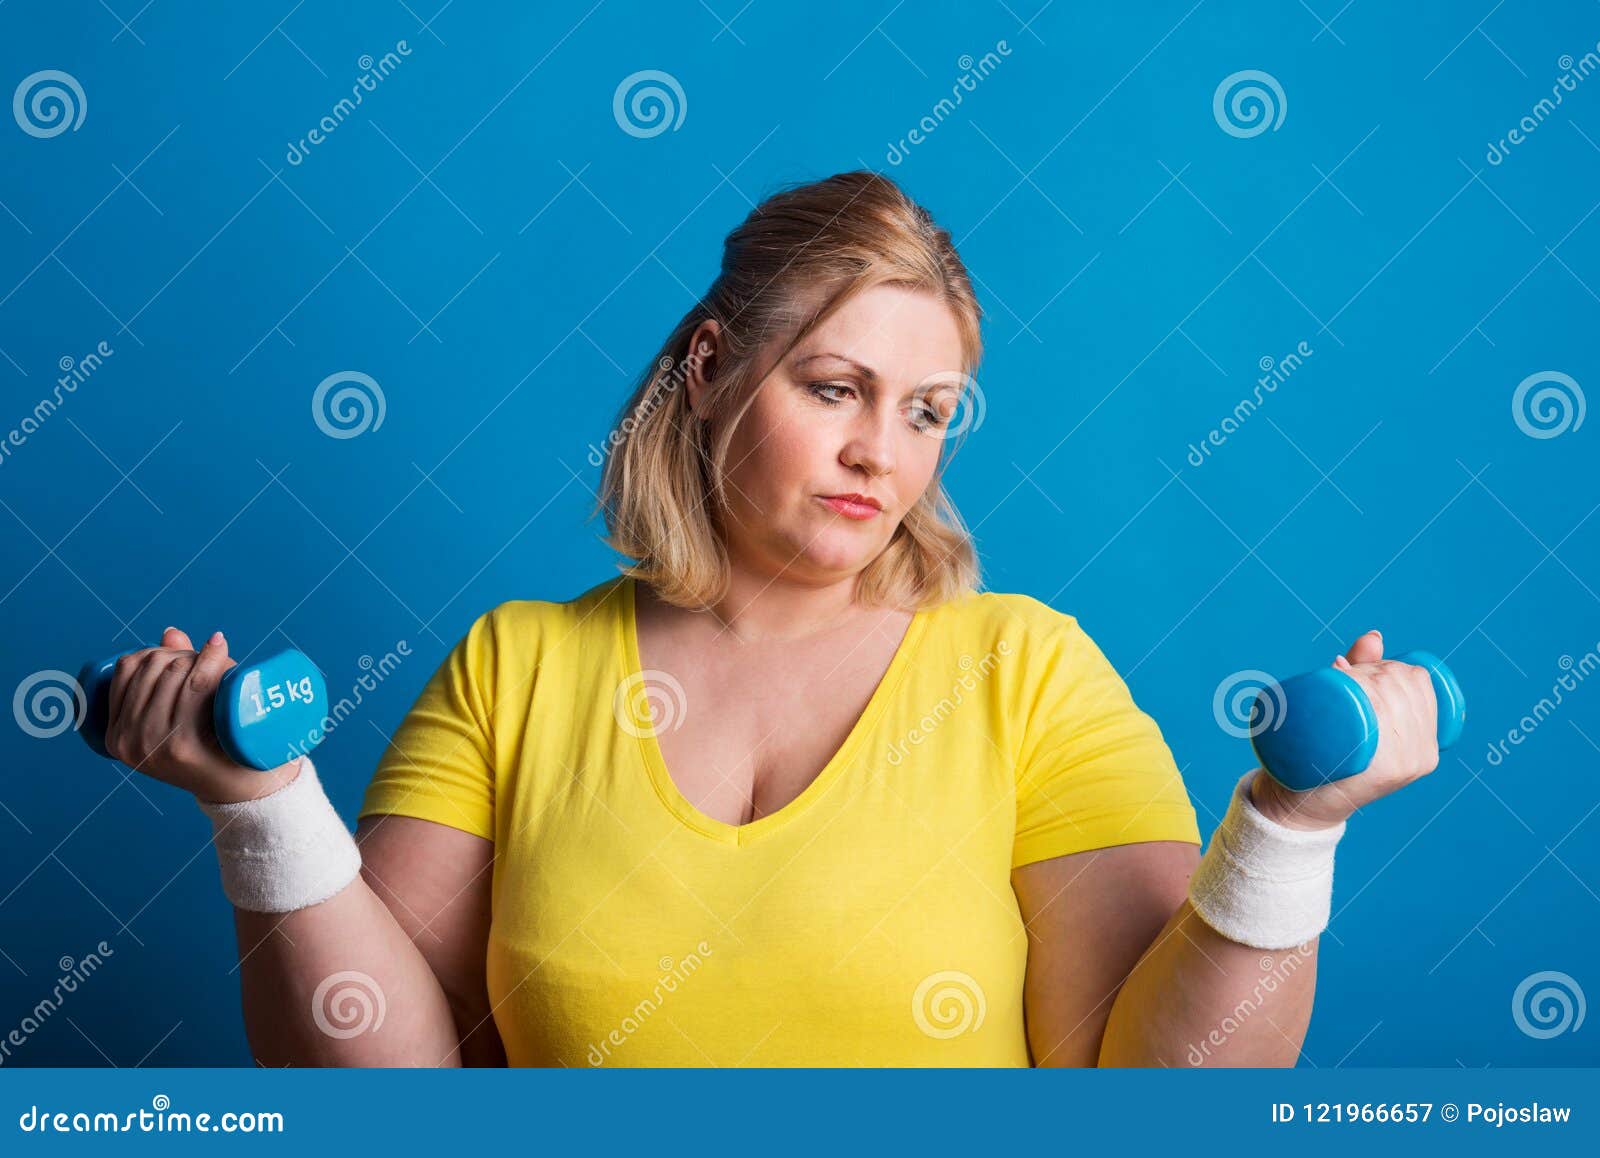 Portrait of an Unhappy Overweight Woman with Dumbbells in Studio on a ...